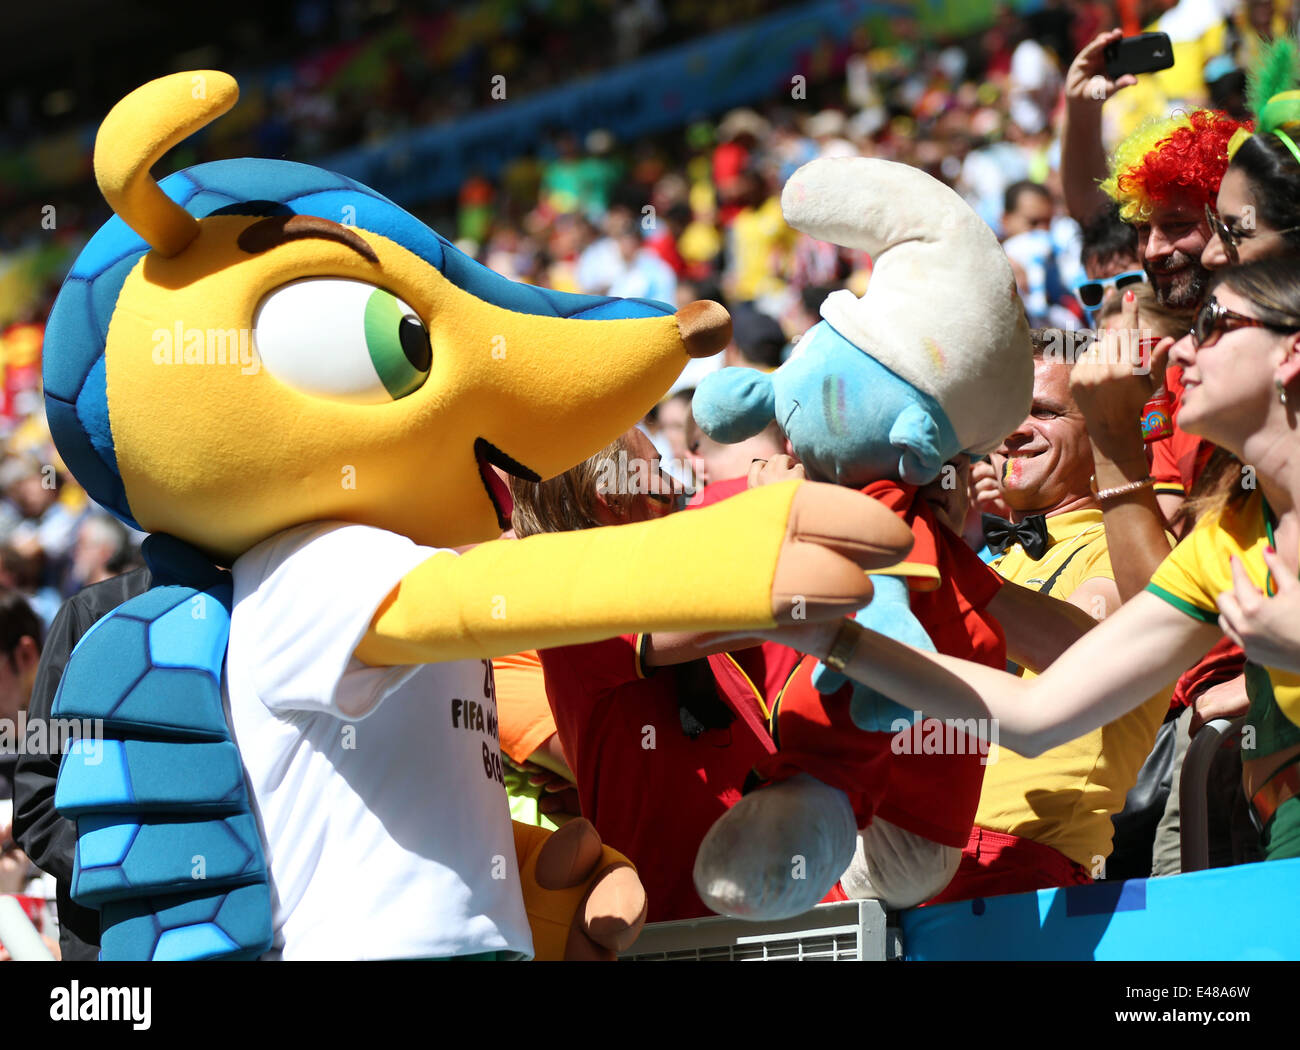 Brasilia, Brazil. 5th July, 2014. Football fans interact with mascot Fuleco prior to a quarter-finals match between Argentina and Belgium of 2014 FIFA World Cup at the Estadio Nacional Stadium in Brasilia, Brazil, on July 5, 2014. Credit:  Li Ming/Xinhua/Alamy Live News Stock Photo